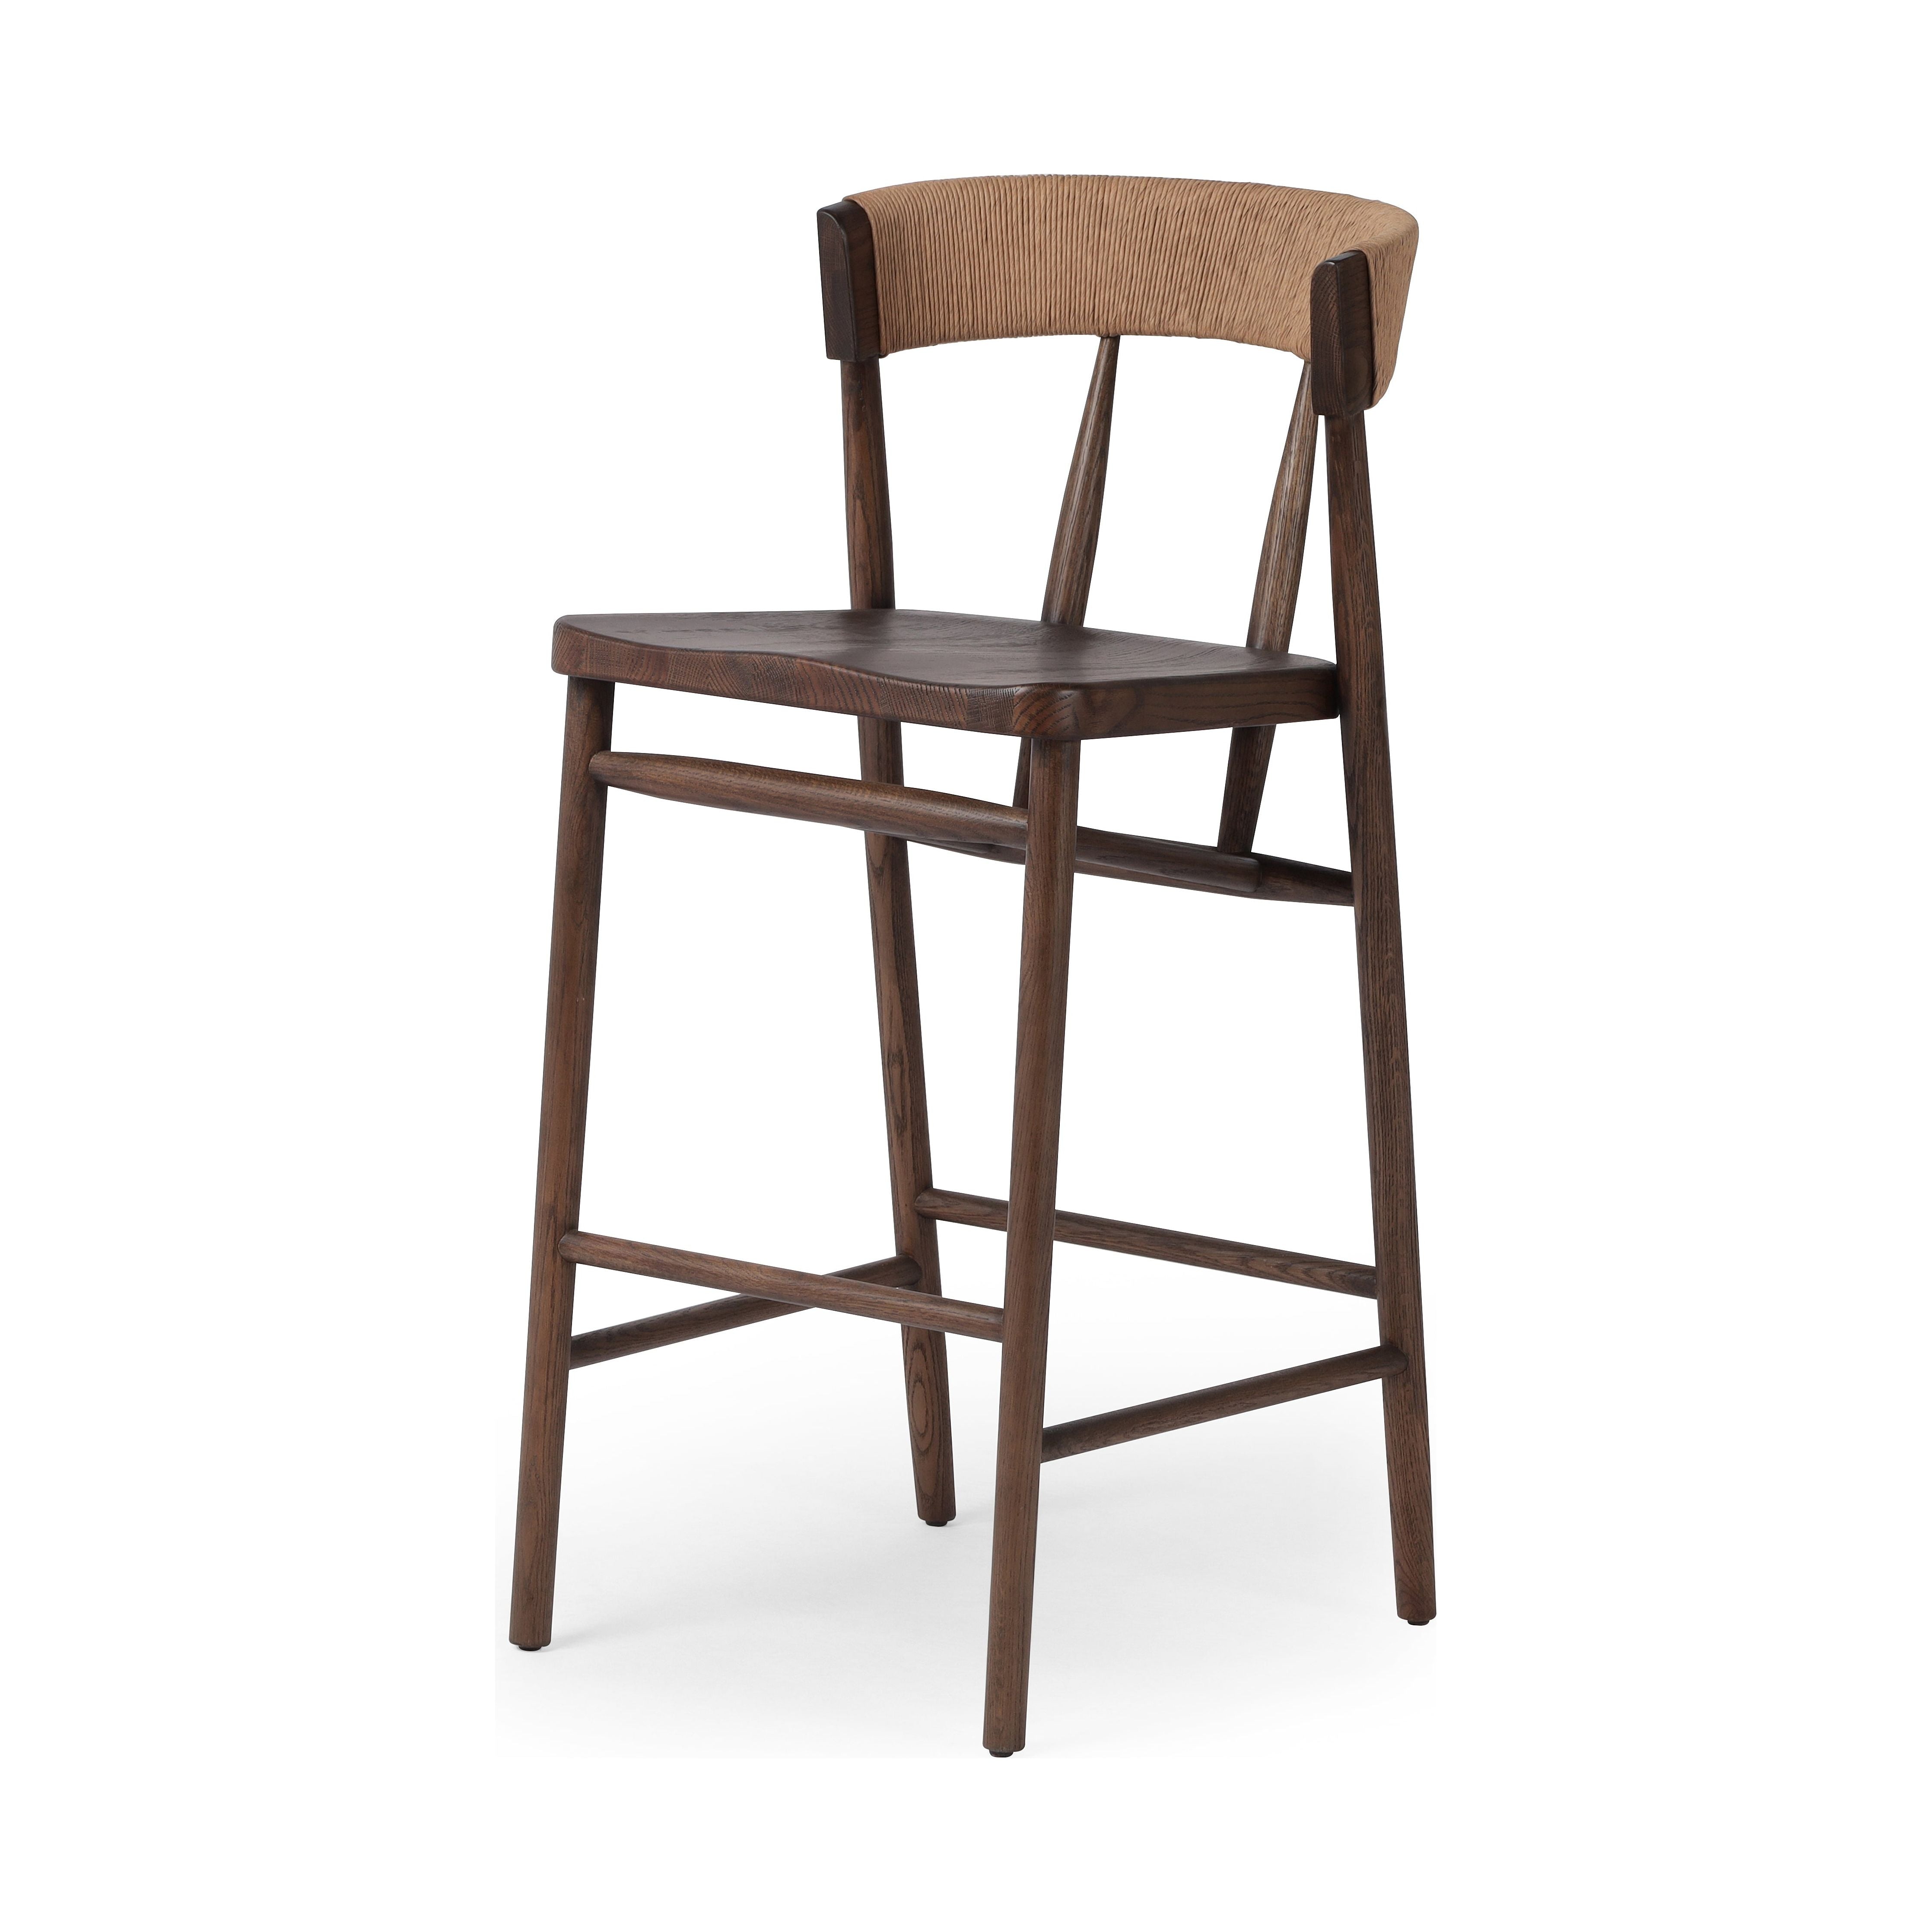 A solid oak bar stool defined by tapered legs and framing gives an updated look to the classic whistler chair. Finished with a paper rush wrapped detail on the back. Amethyst Home provides interior design, new construction, custom furniture, and area rugs in the Seattle metro area.